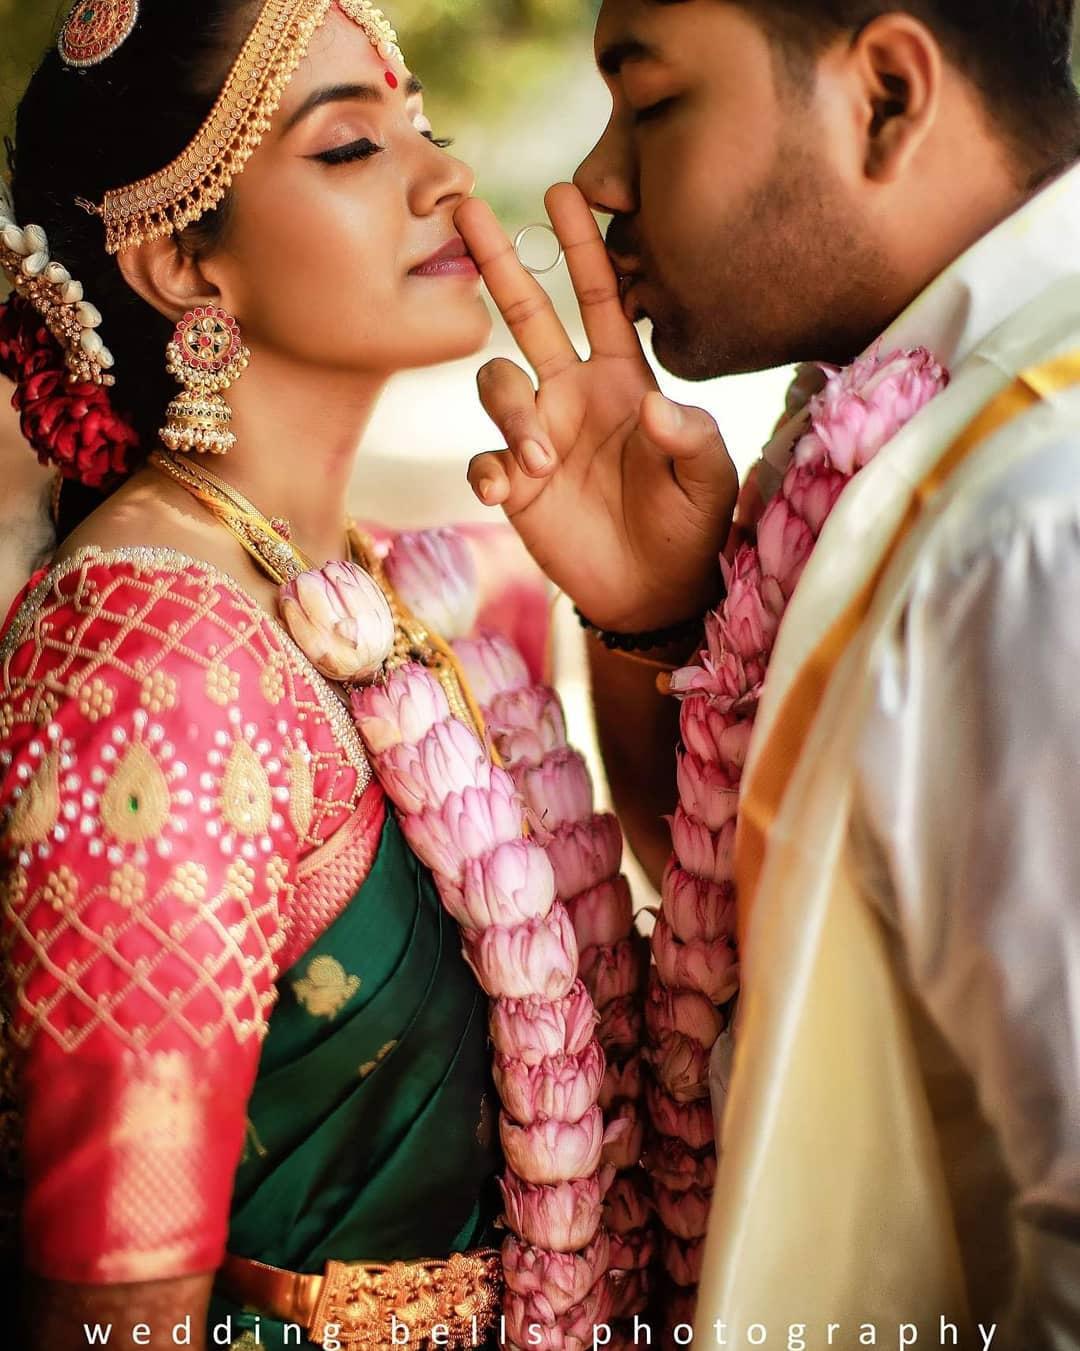 CANDID WEDDING PHOTOGRAPGHERS IN COIMBATORE (22) - IRICH PHOTOGRAPHY